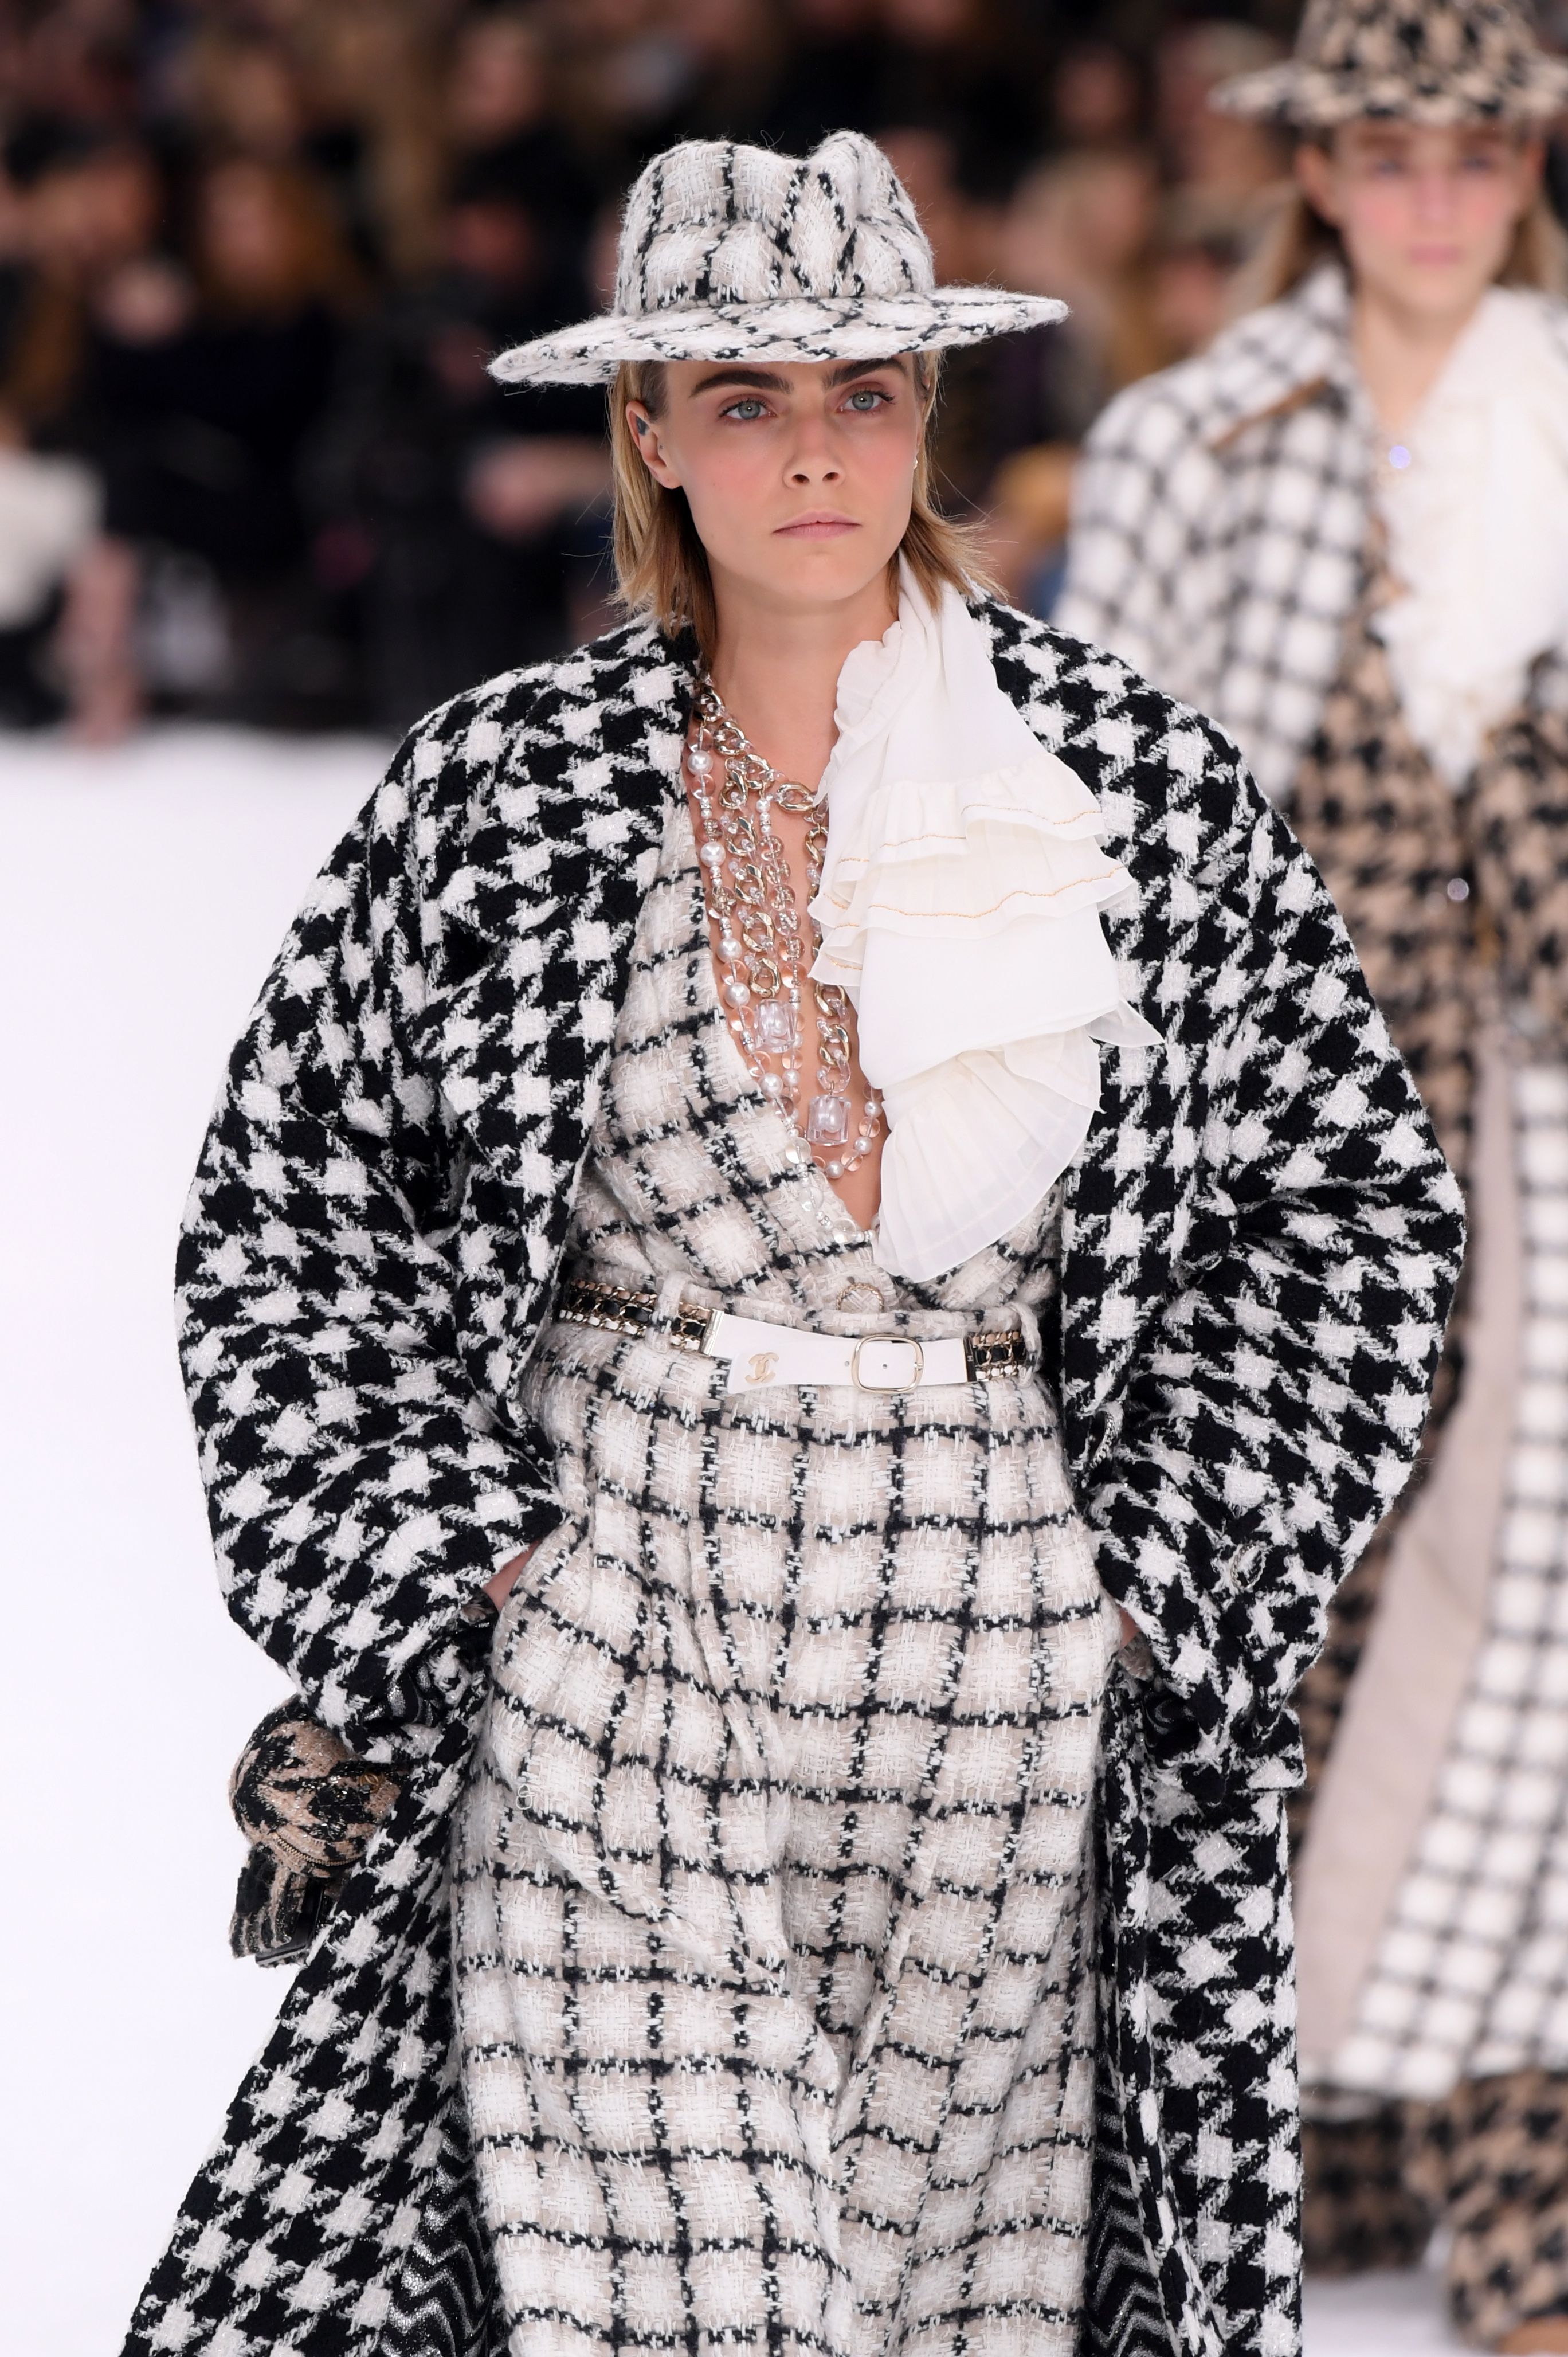 Cara Delevingne Opens Karl Largerfeld's Final Chanel Show With The